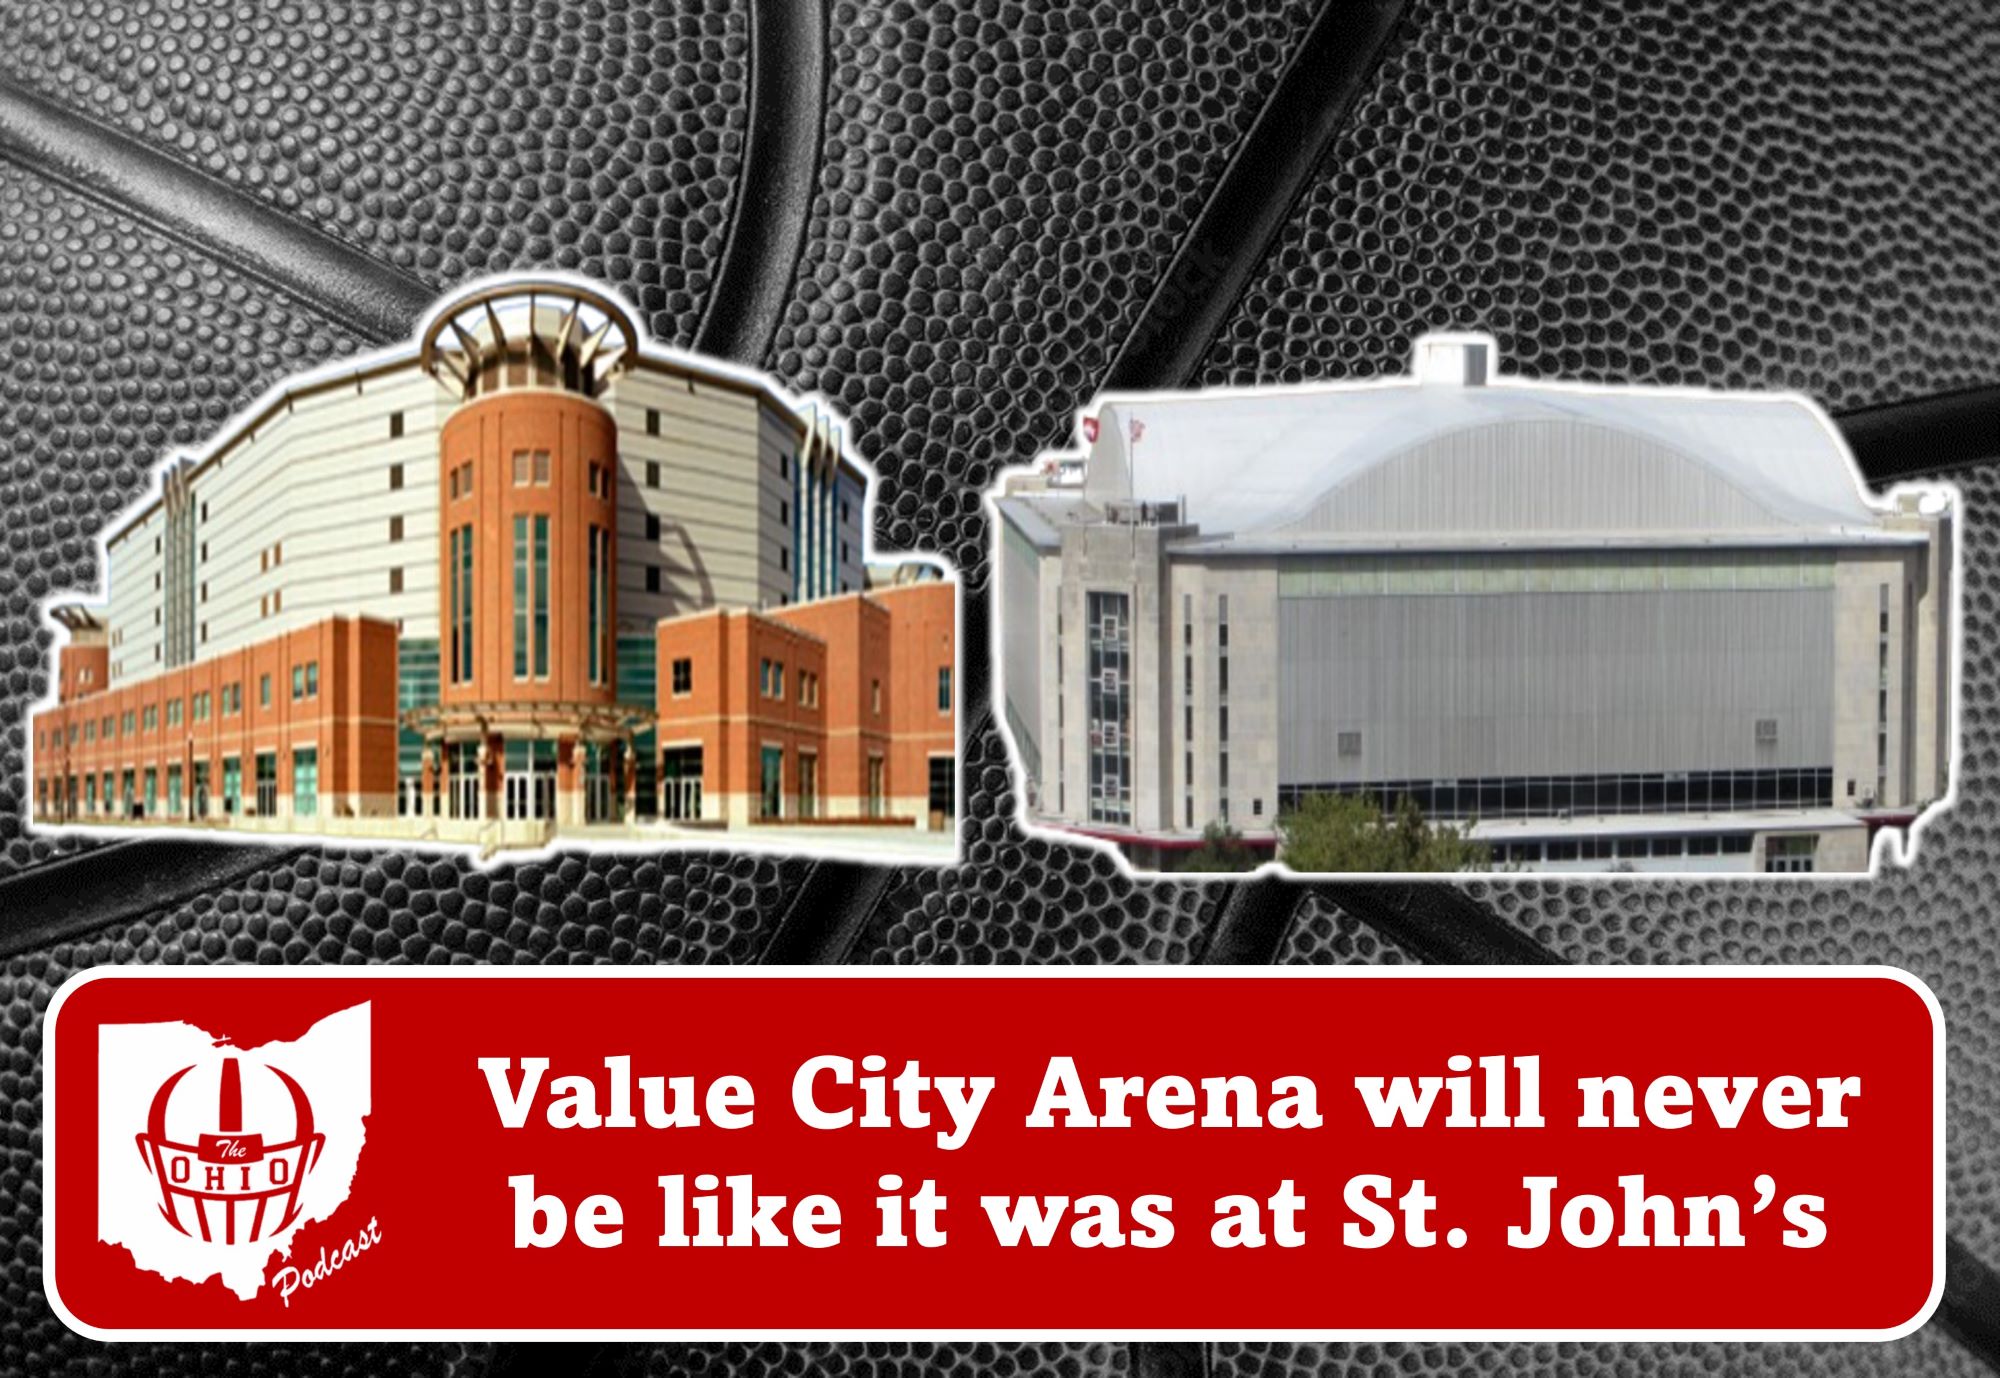 Value City Arena will never be like it was at St. John's.